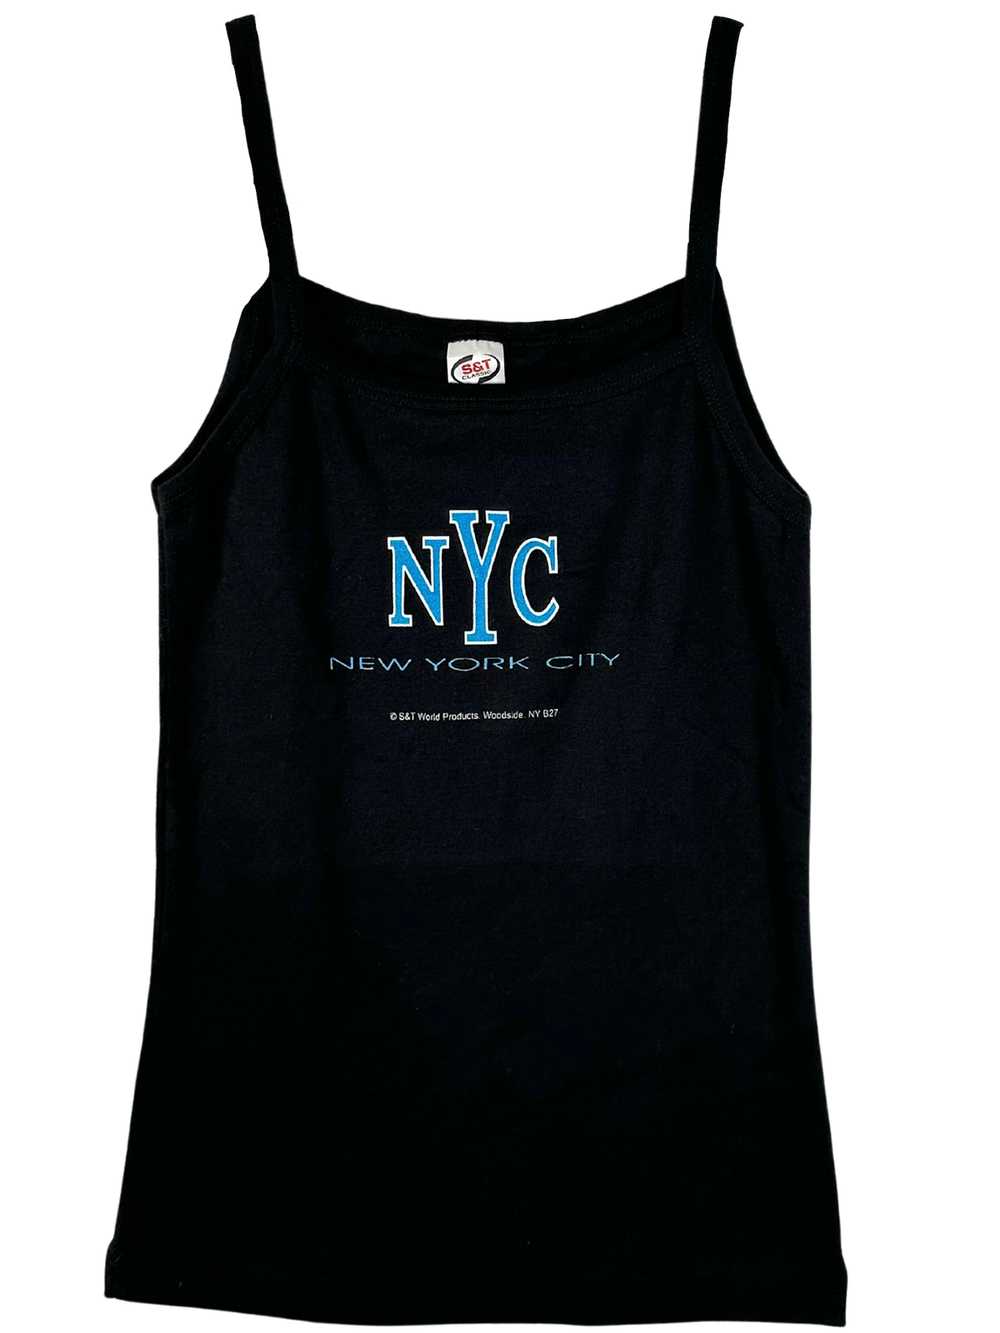 Vintage 1990s NYC Black and Blue Tank - S - image 2